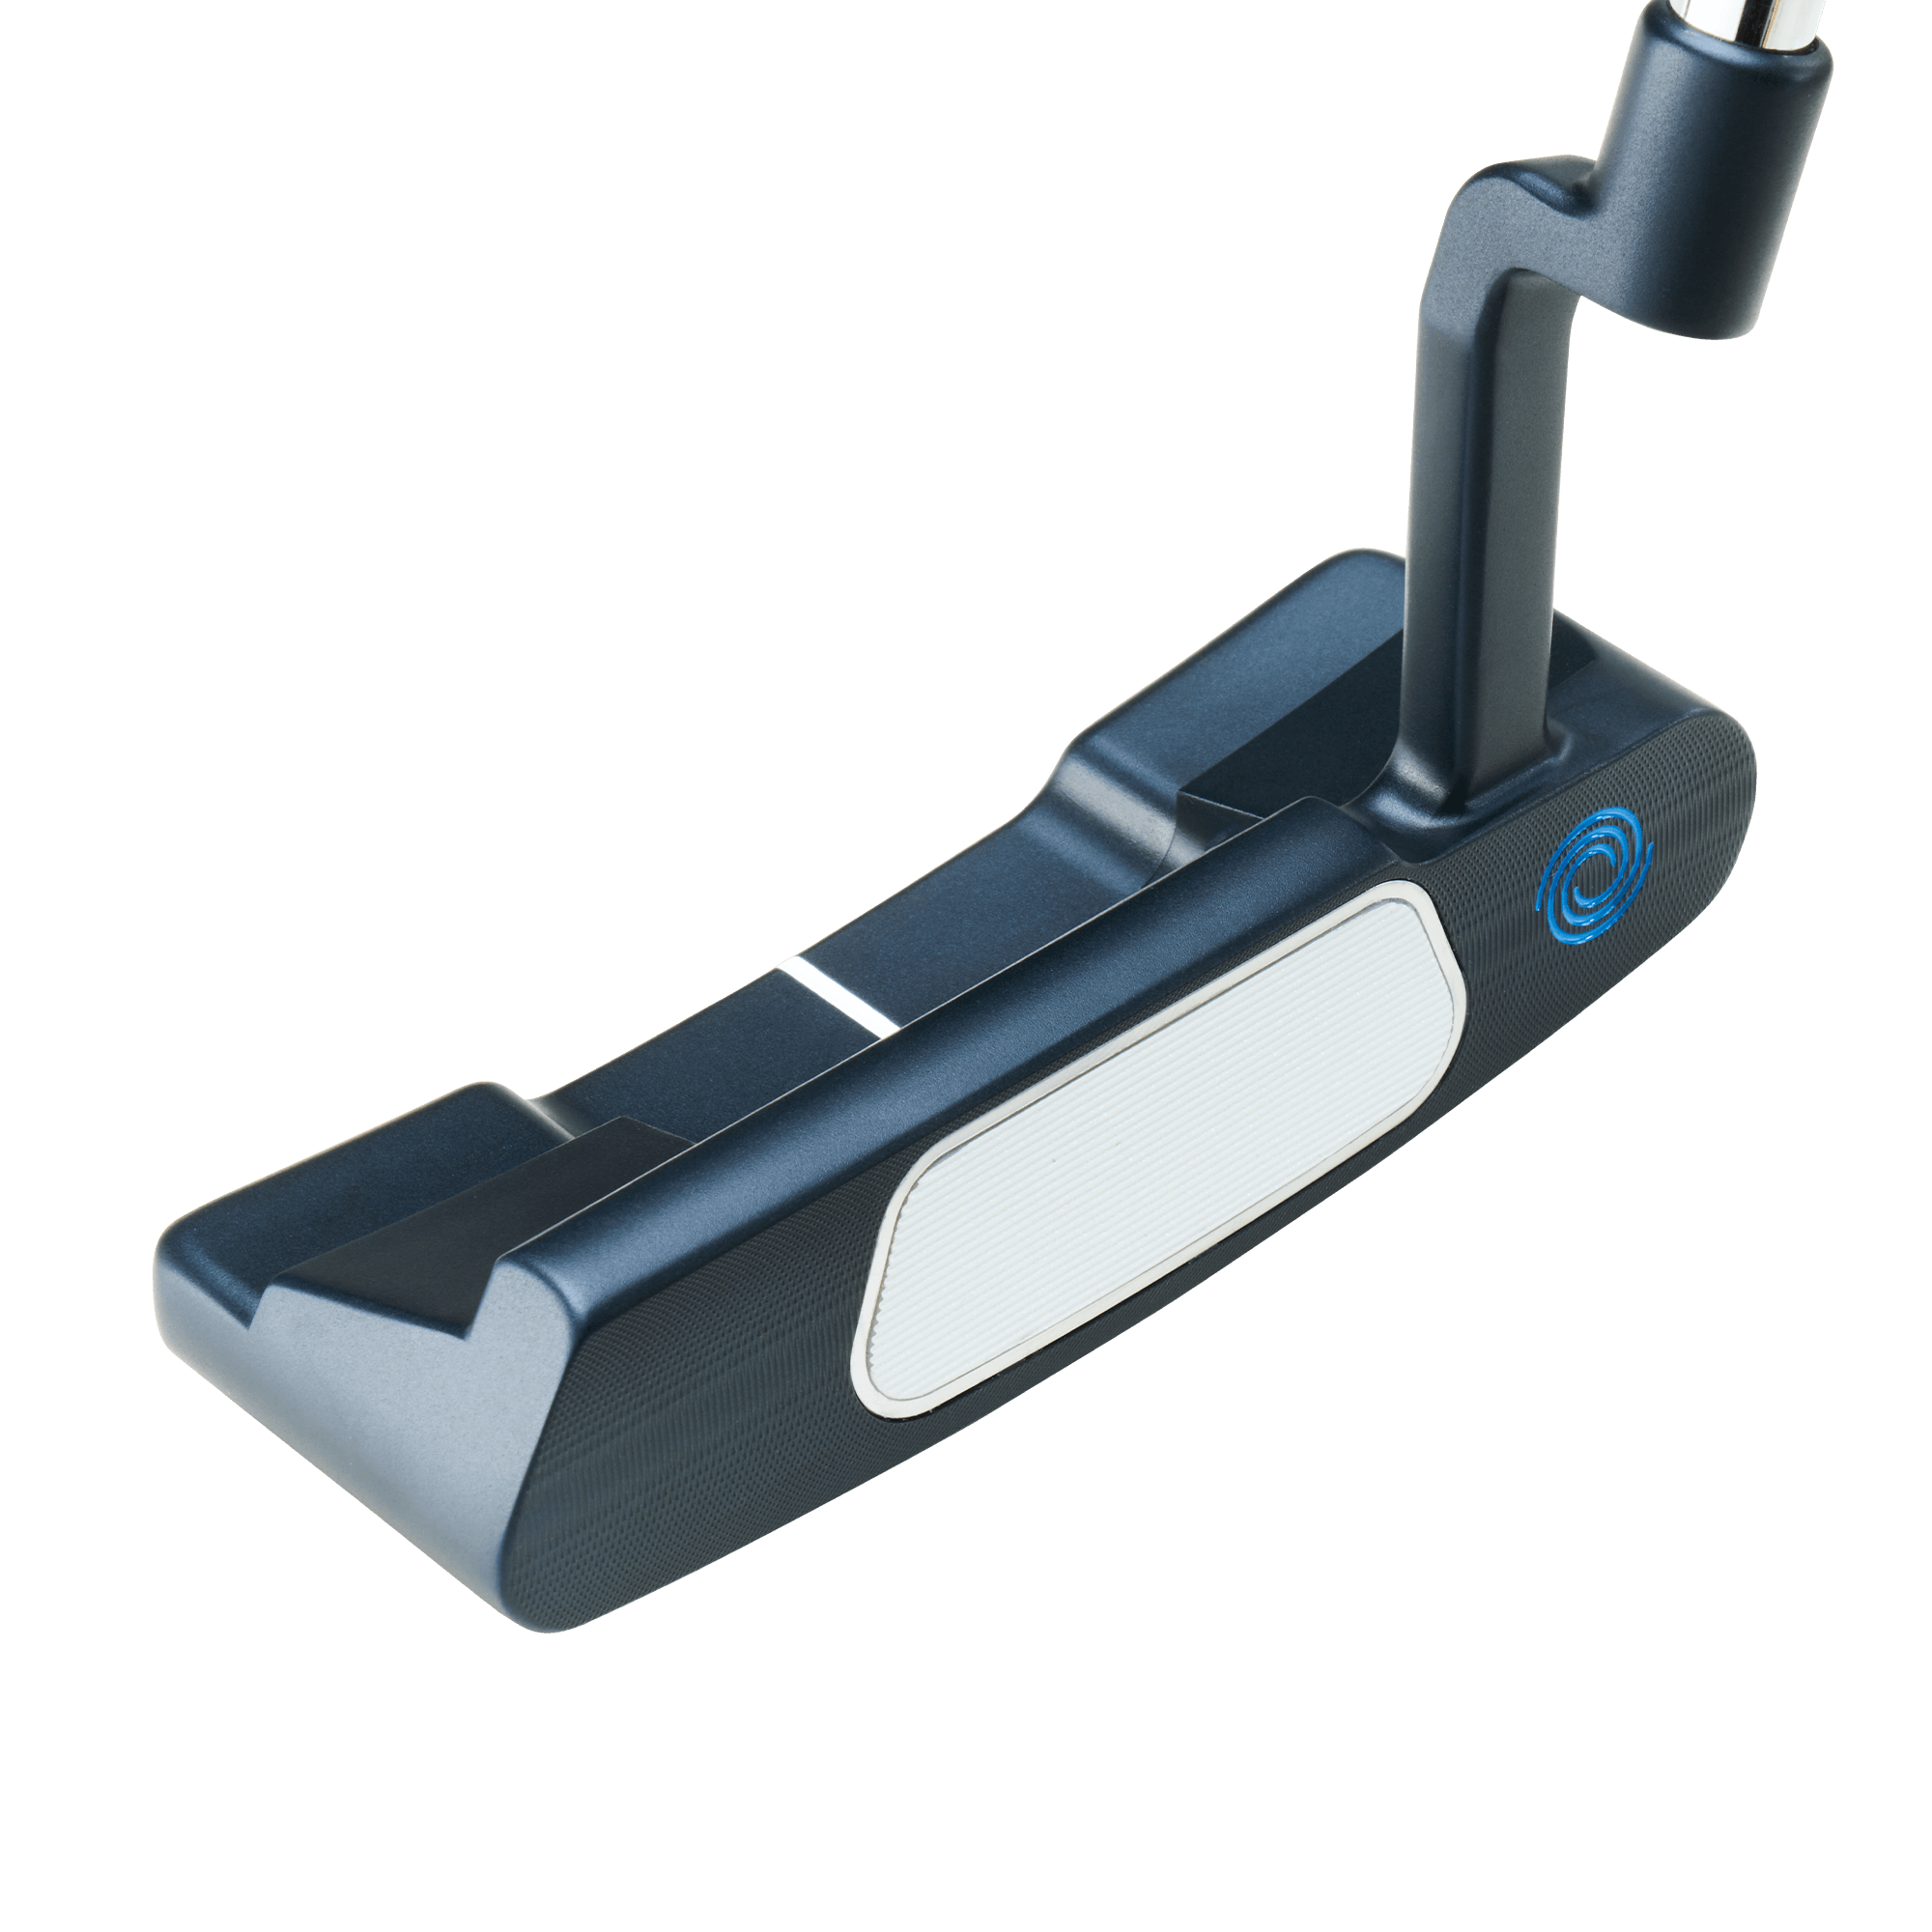 All Ai-ONE Putters